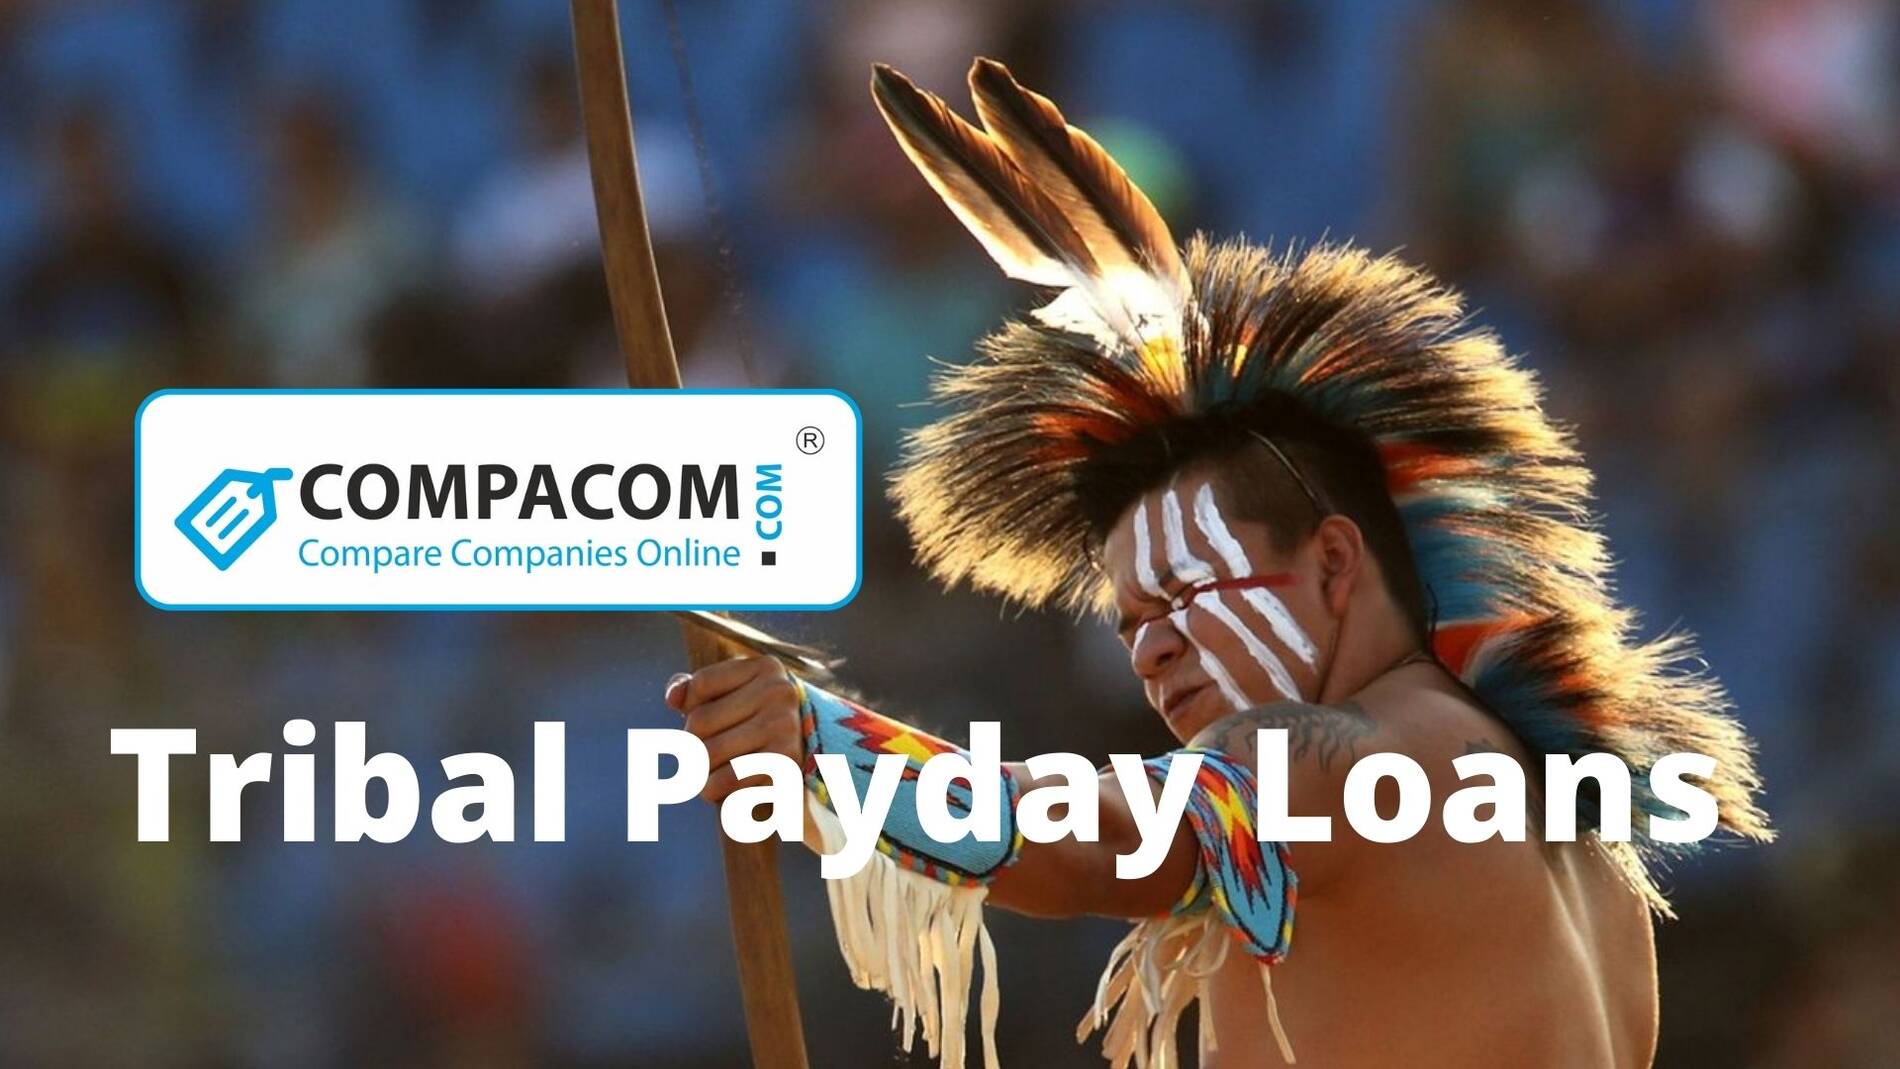 Tribal Payday Loans Compare Companies Online